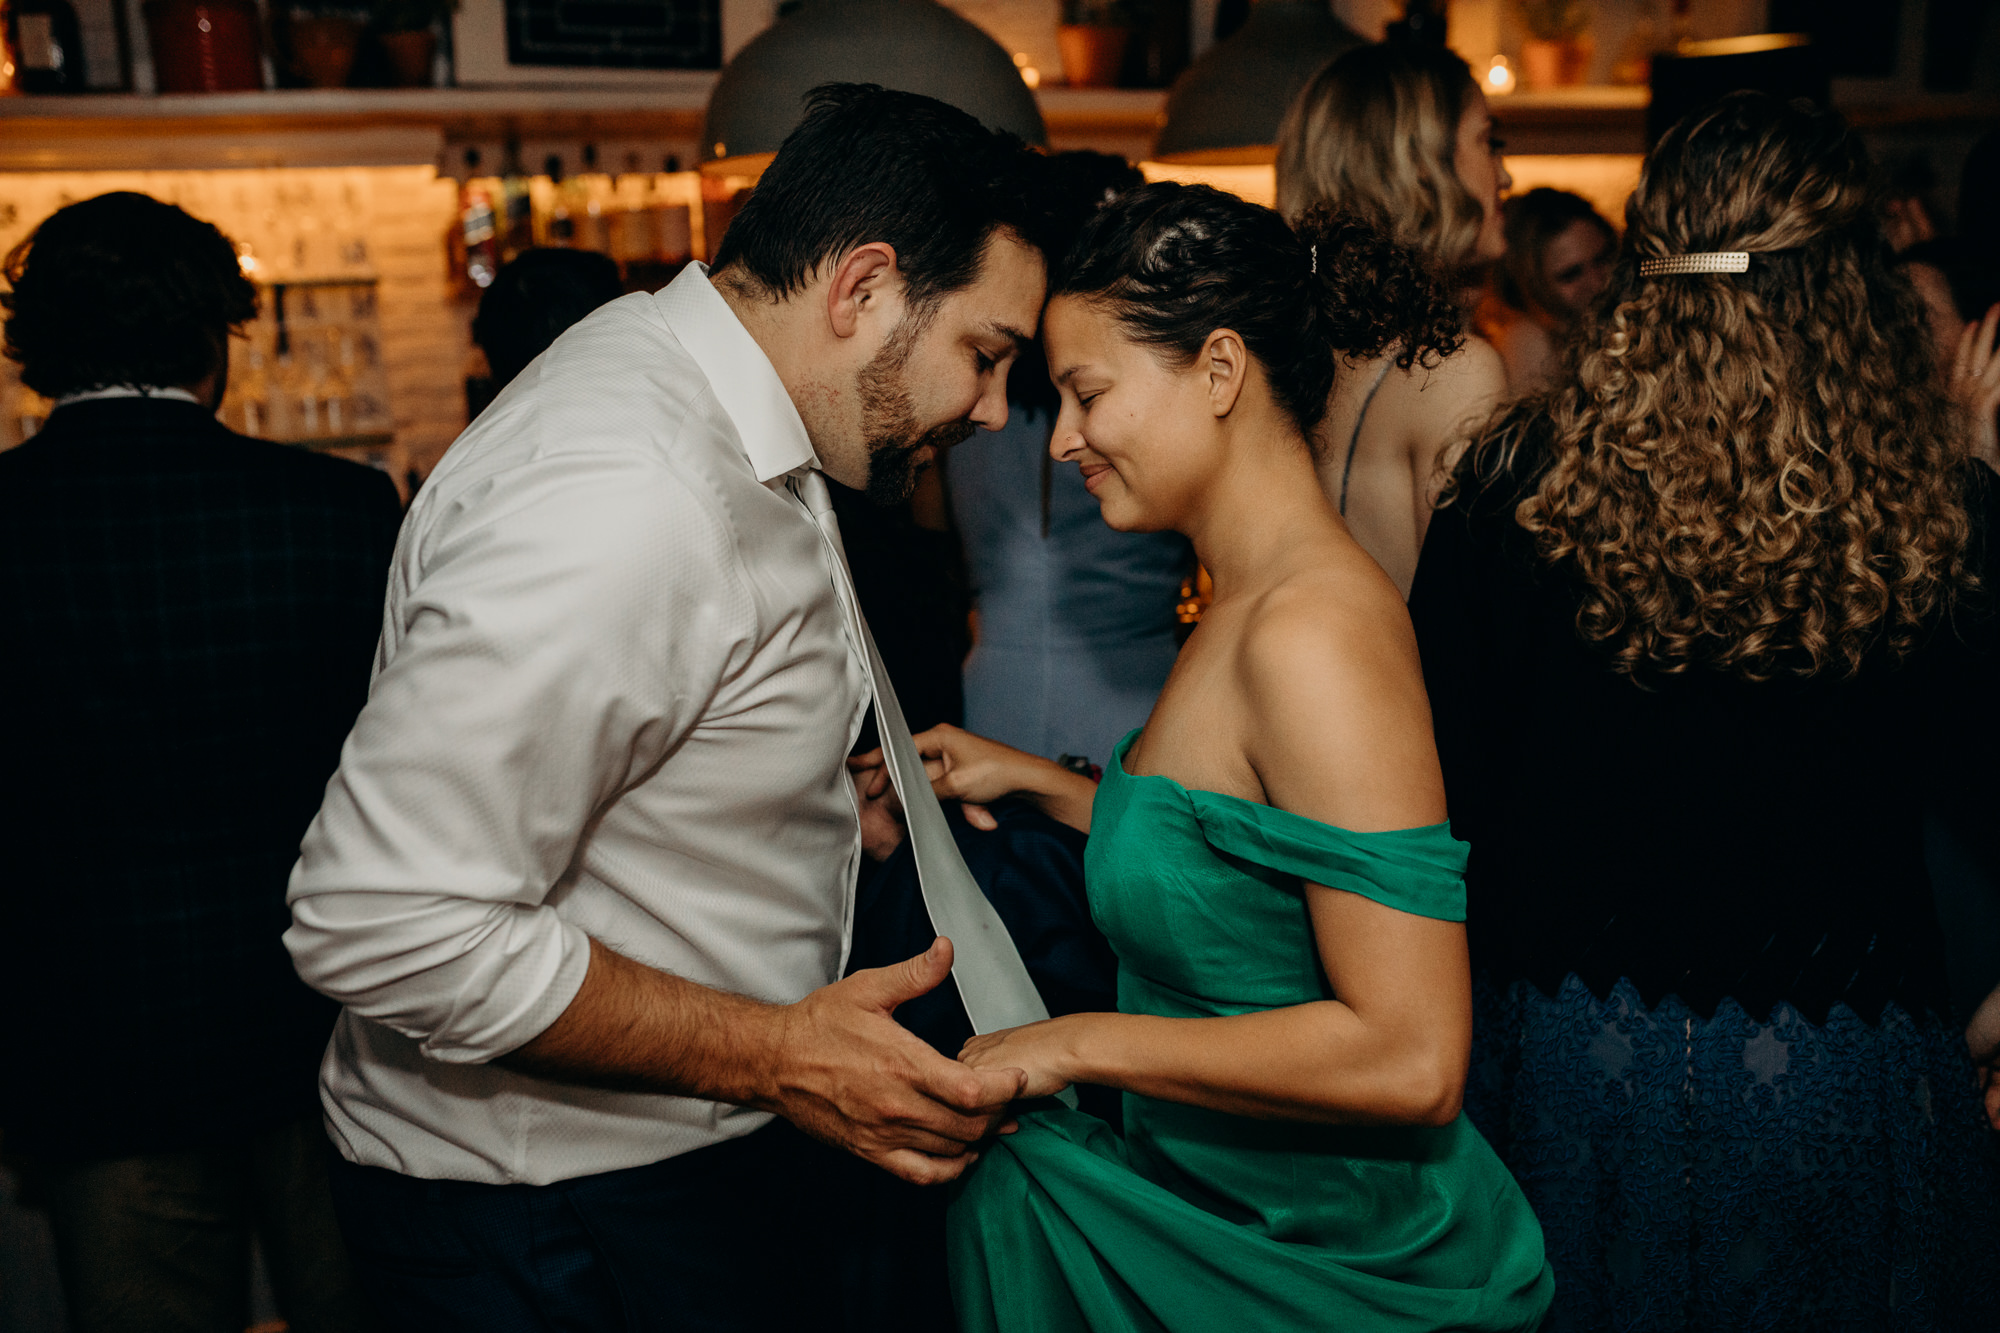 guests dance at a wedding at bobo in the west village, new york city